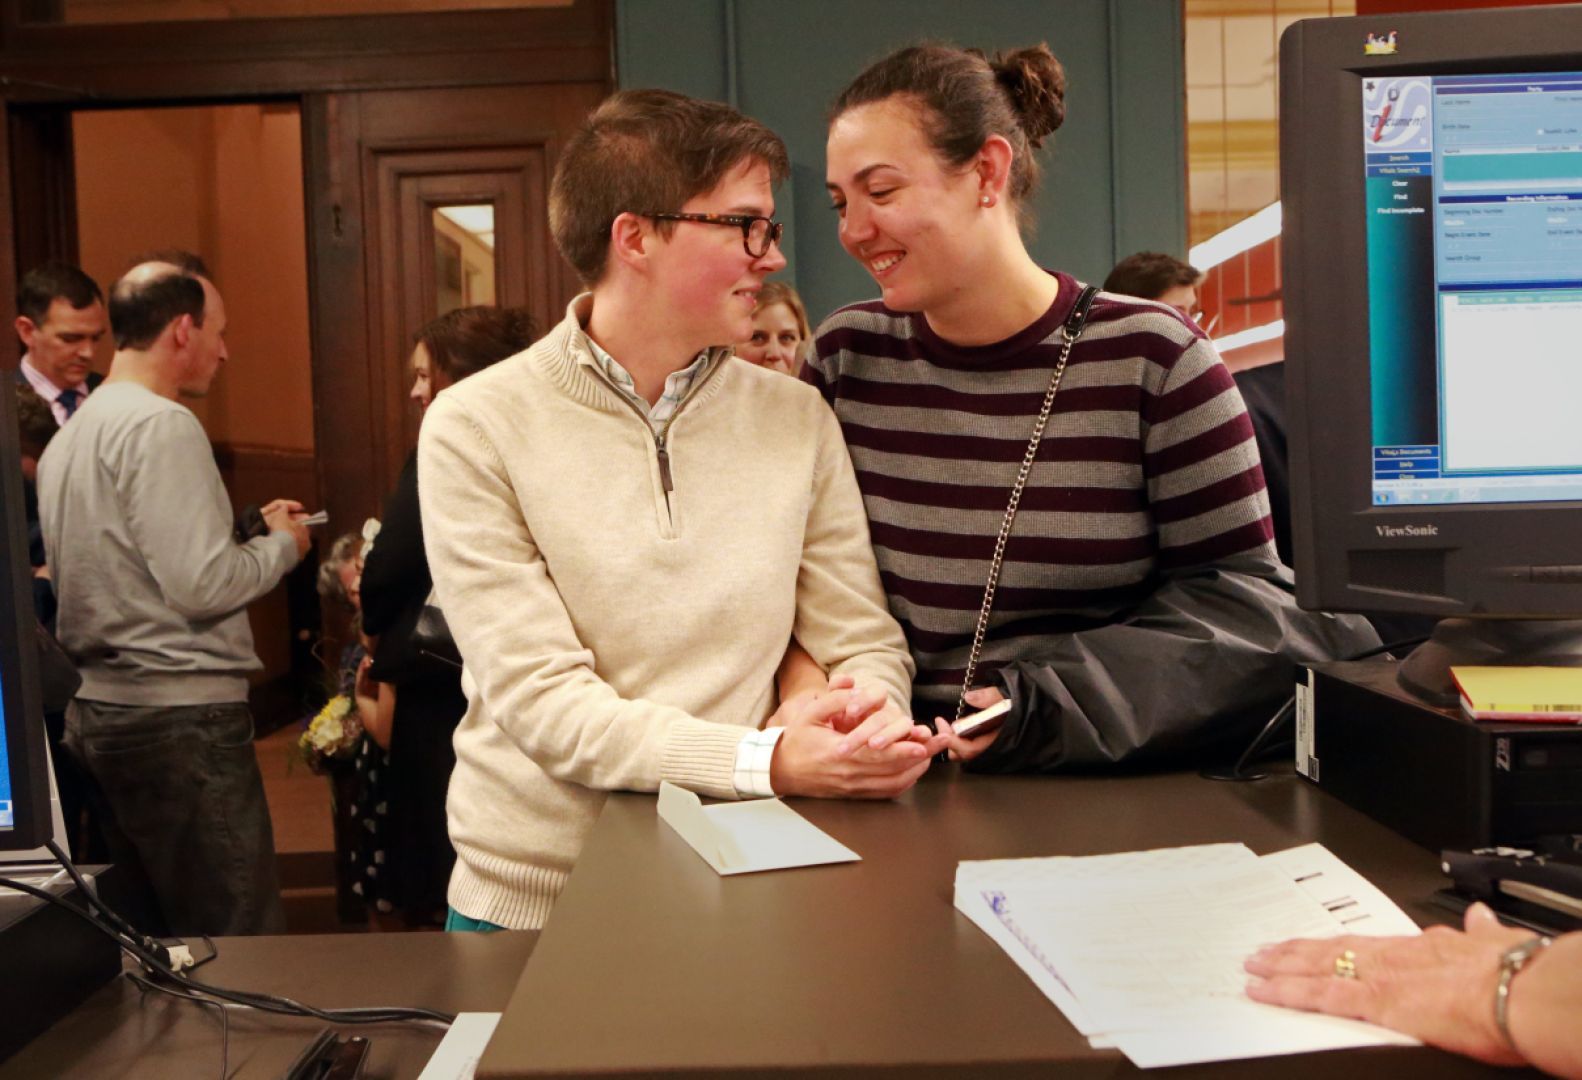 Another gay marriage victory in Missouri, as federal judge in Kansas City strikes down